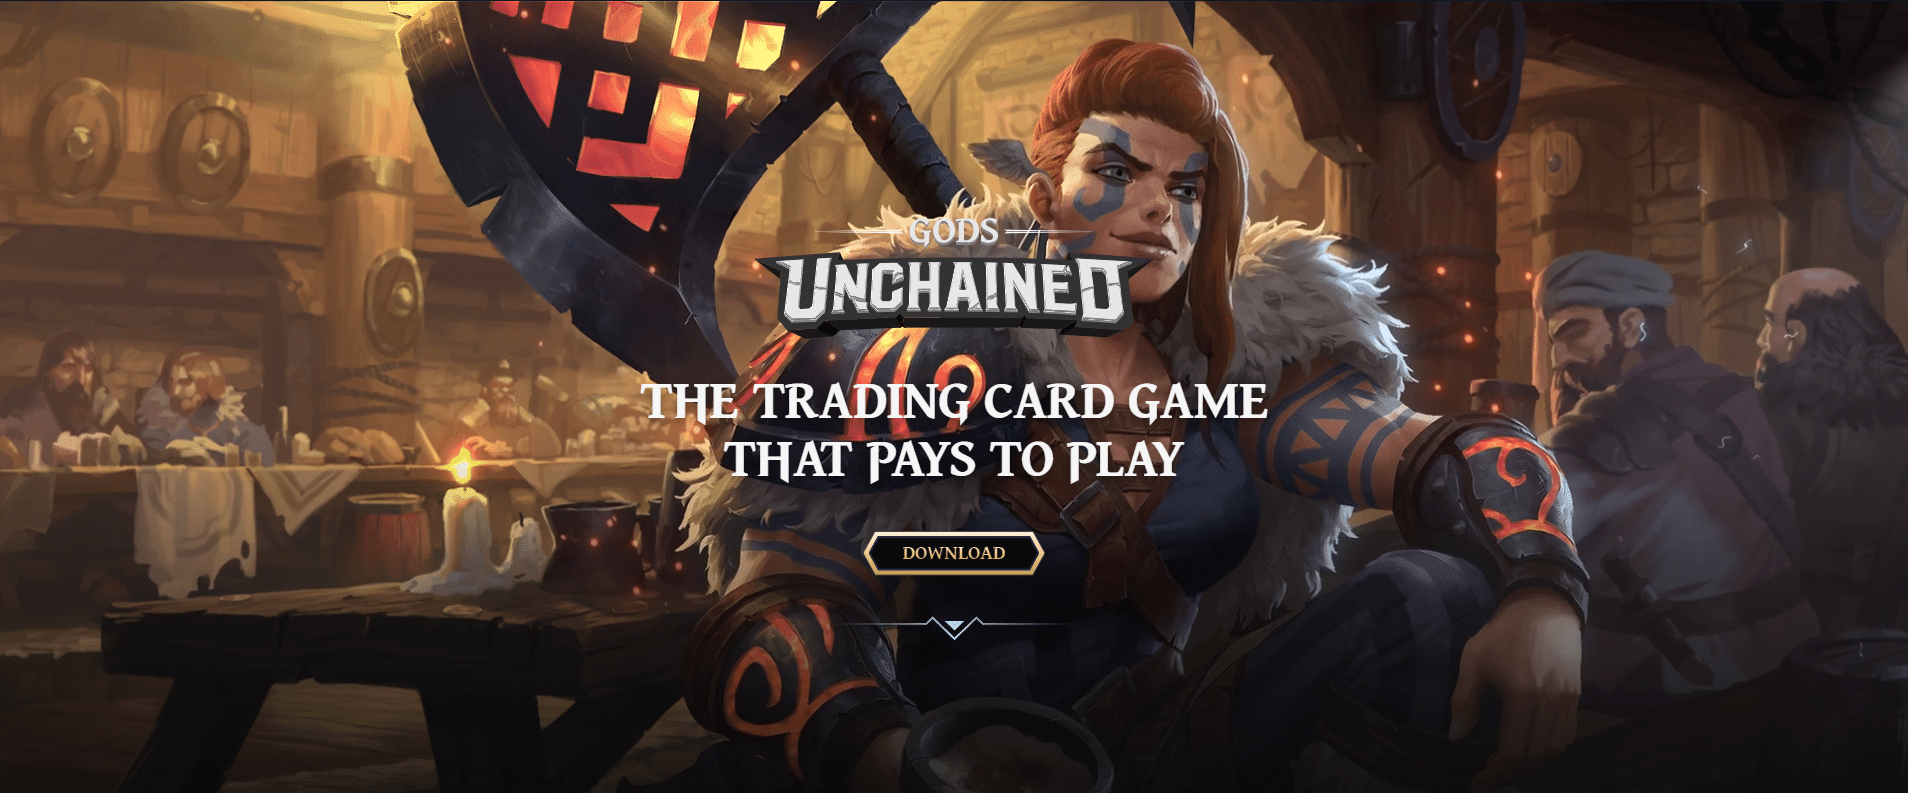 Gods Unchained — Digital trading card game with P2E elements